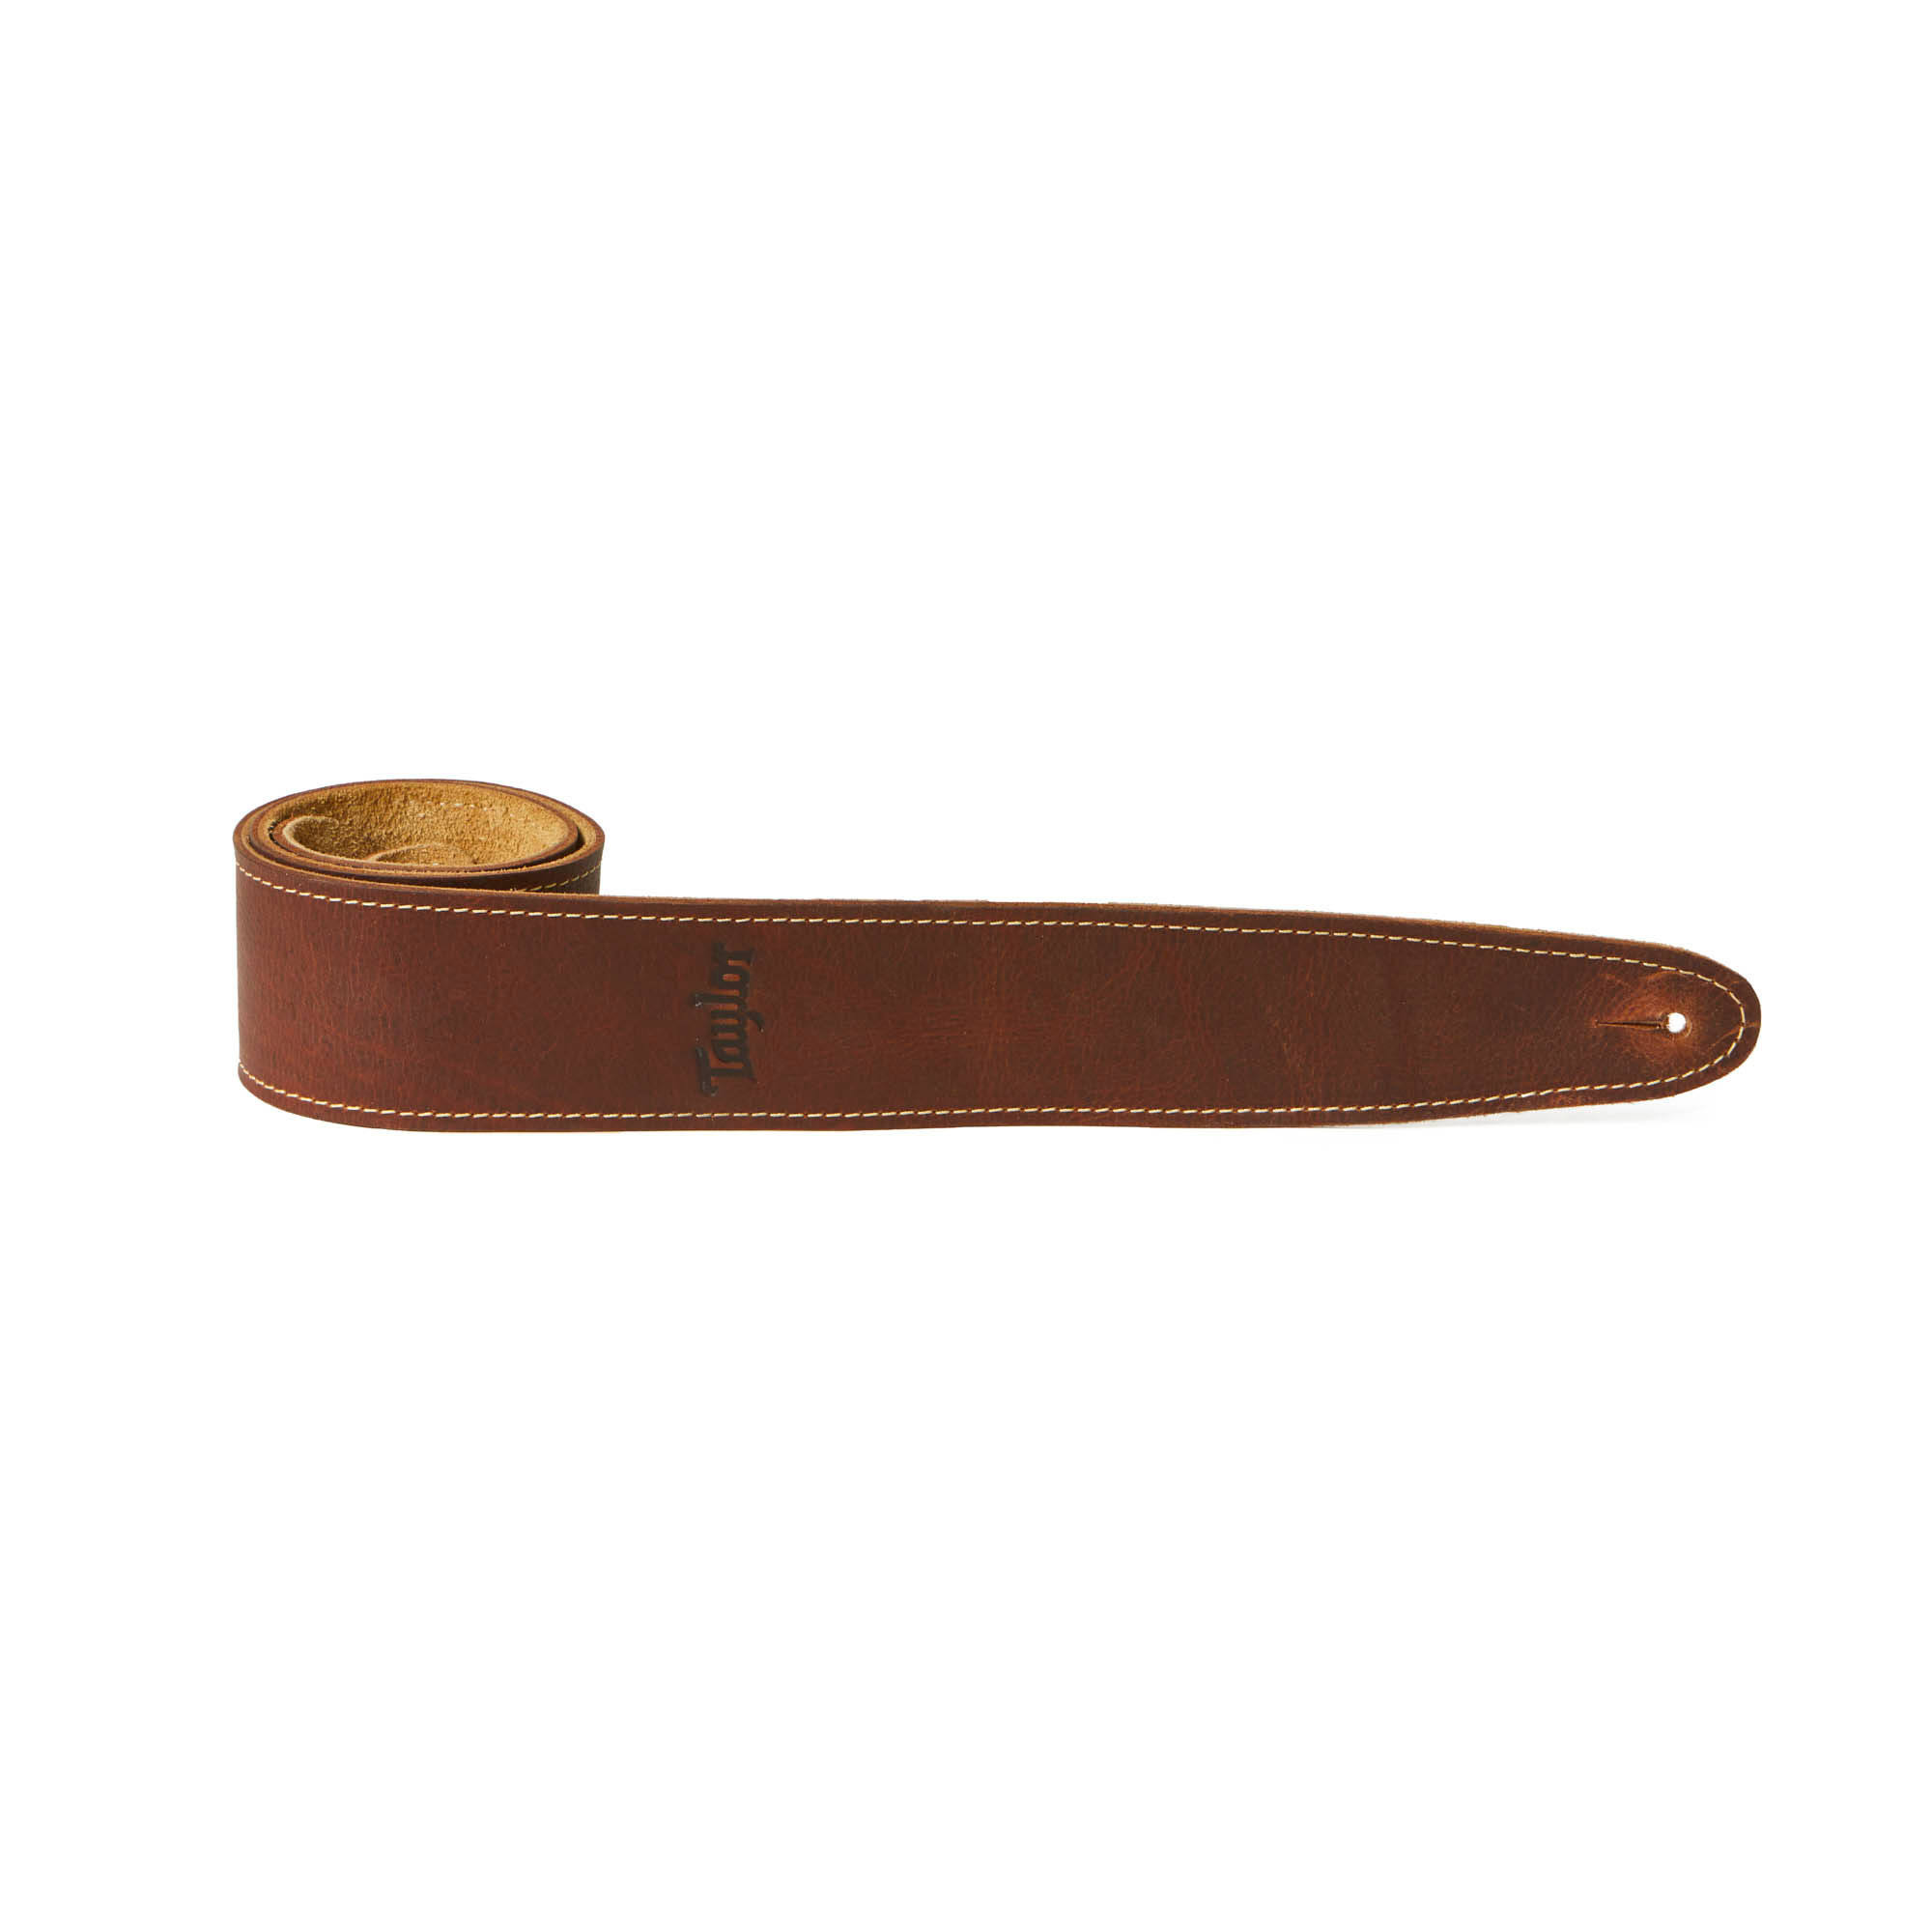 Taylor Leather/Suede Strap - Medium Brown 2.5"